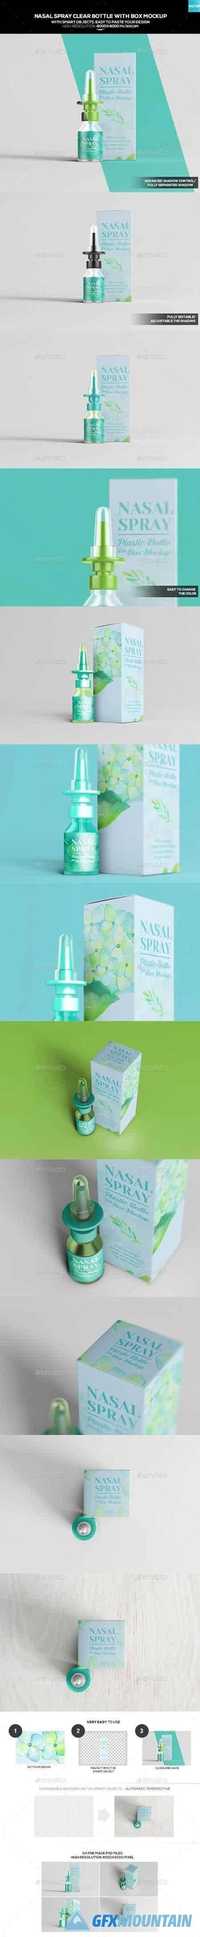 Nasal Spray Clear Bottle With Box Mockup 20250084